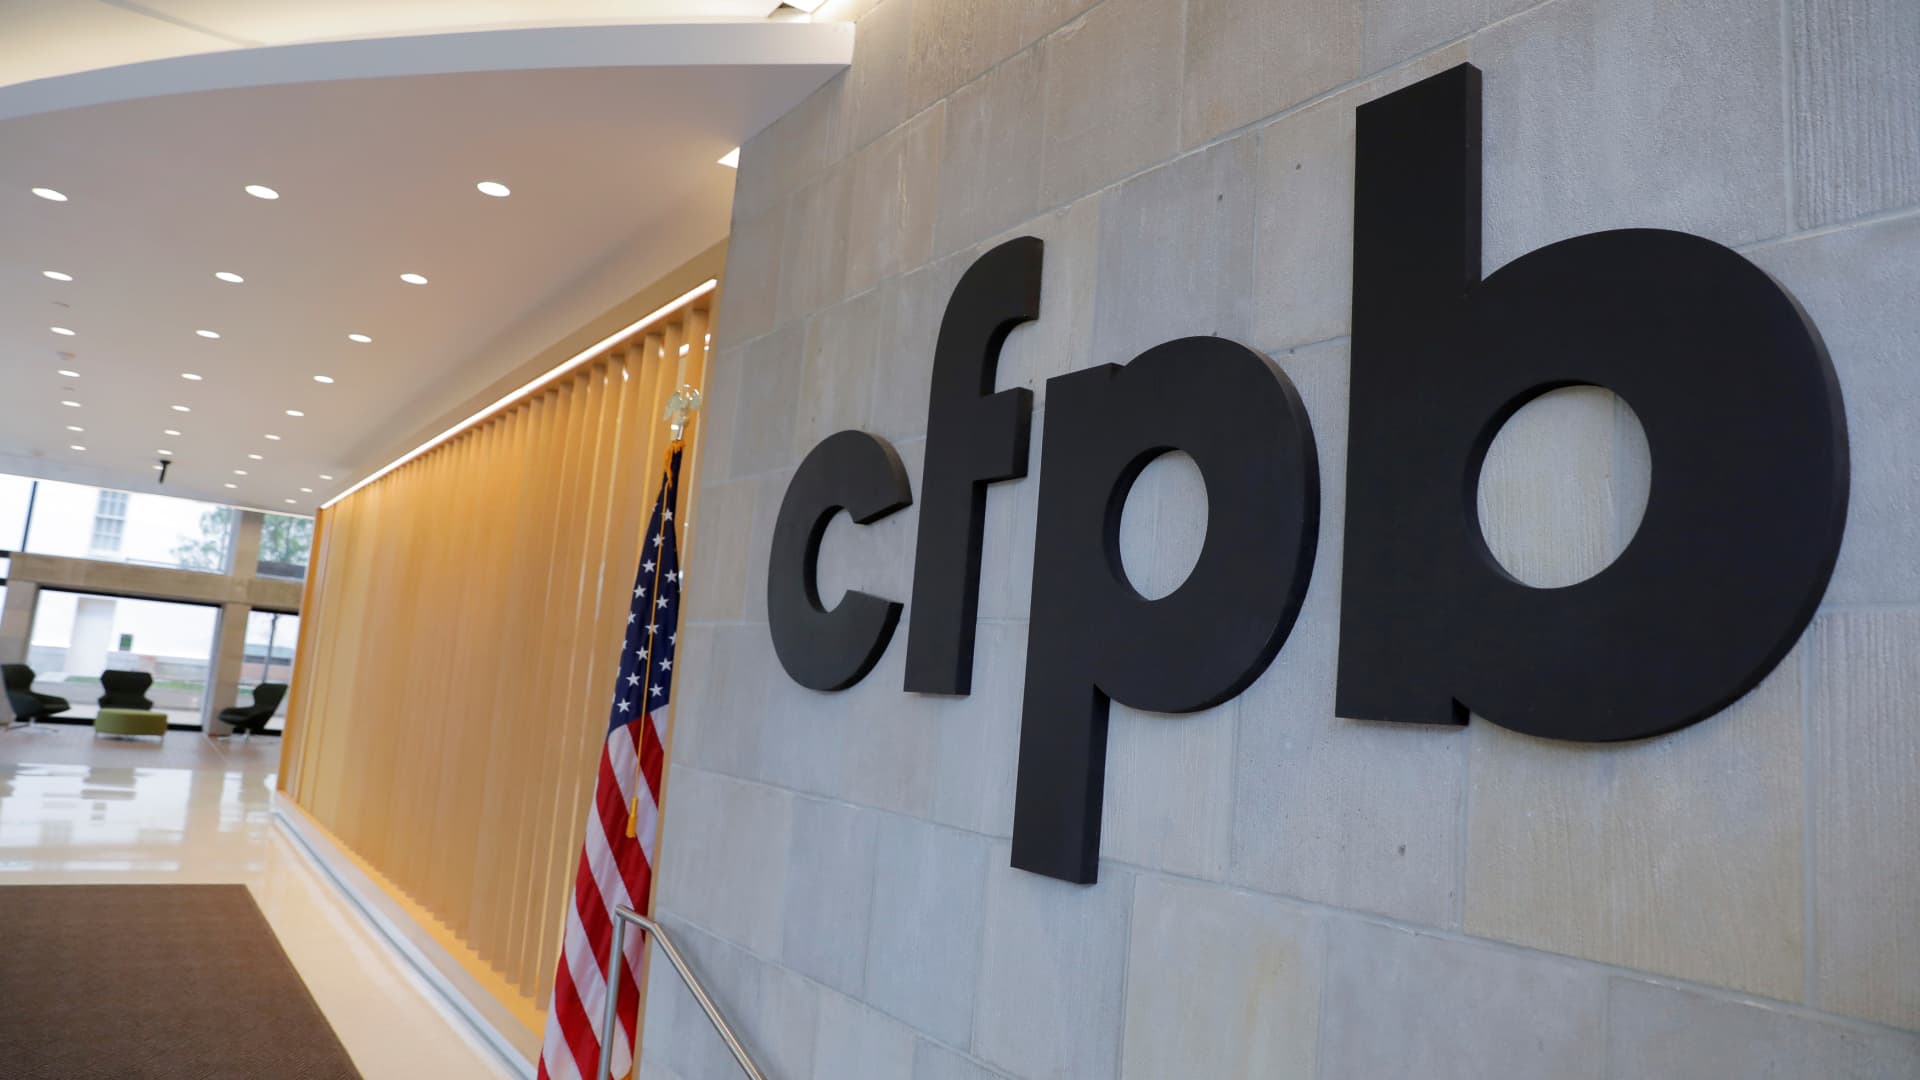 Consumer Financial Protection Bureau targets excessive credit card fees in new rule proposal